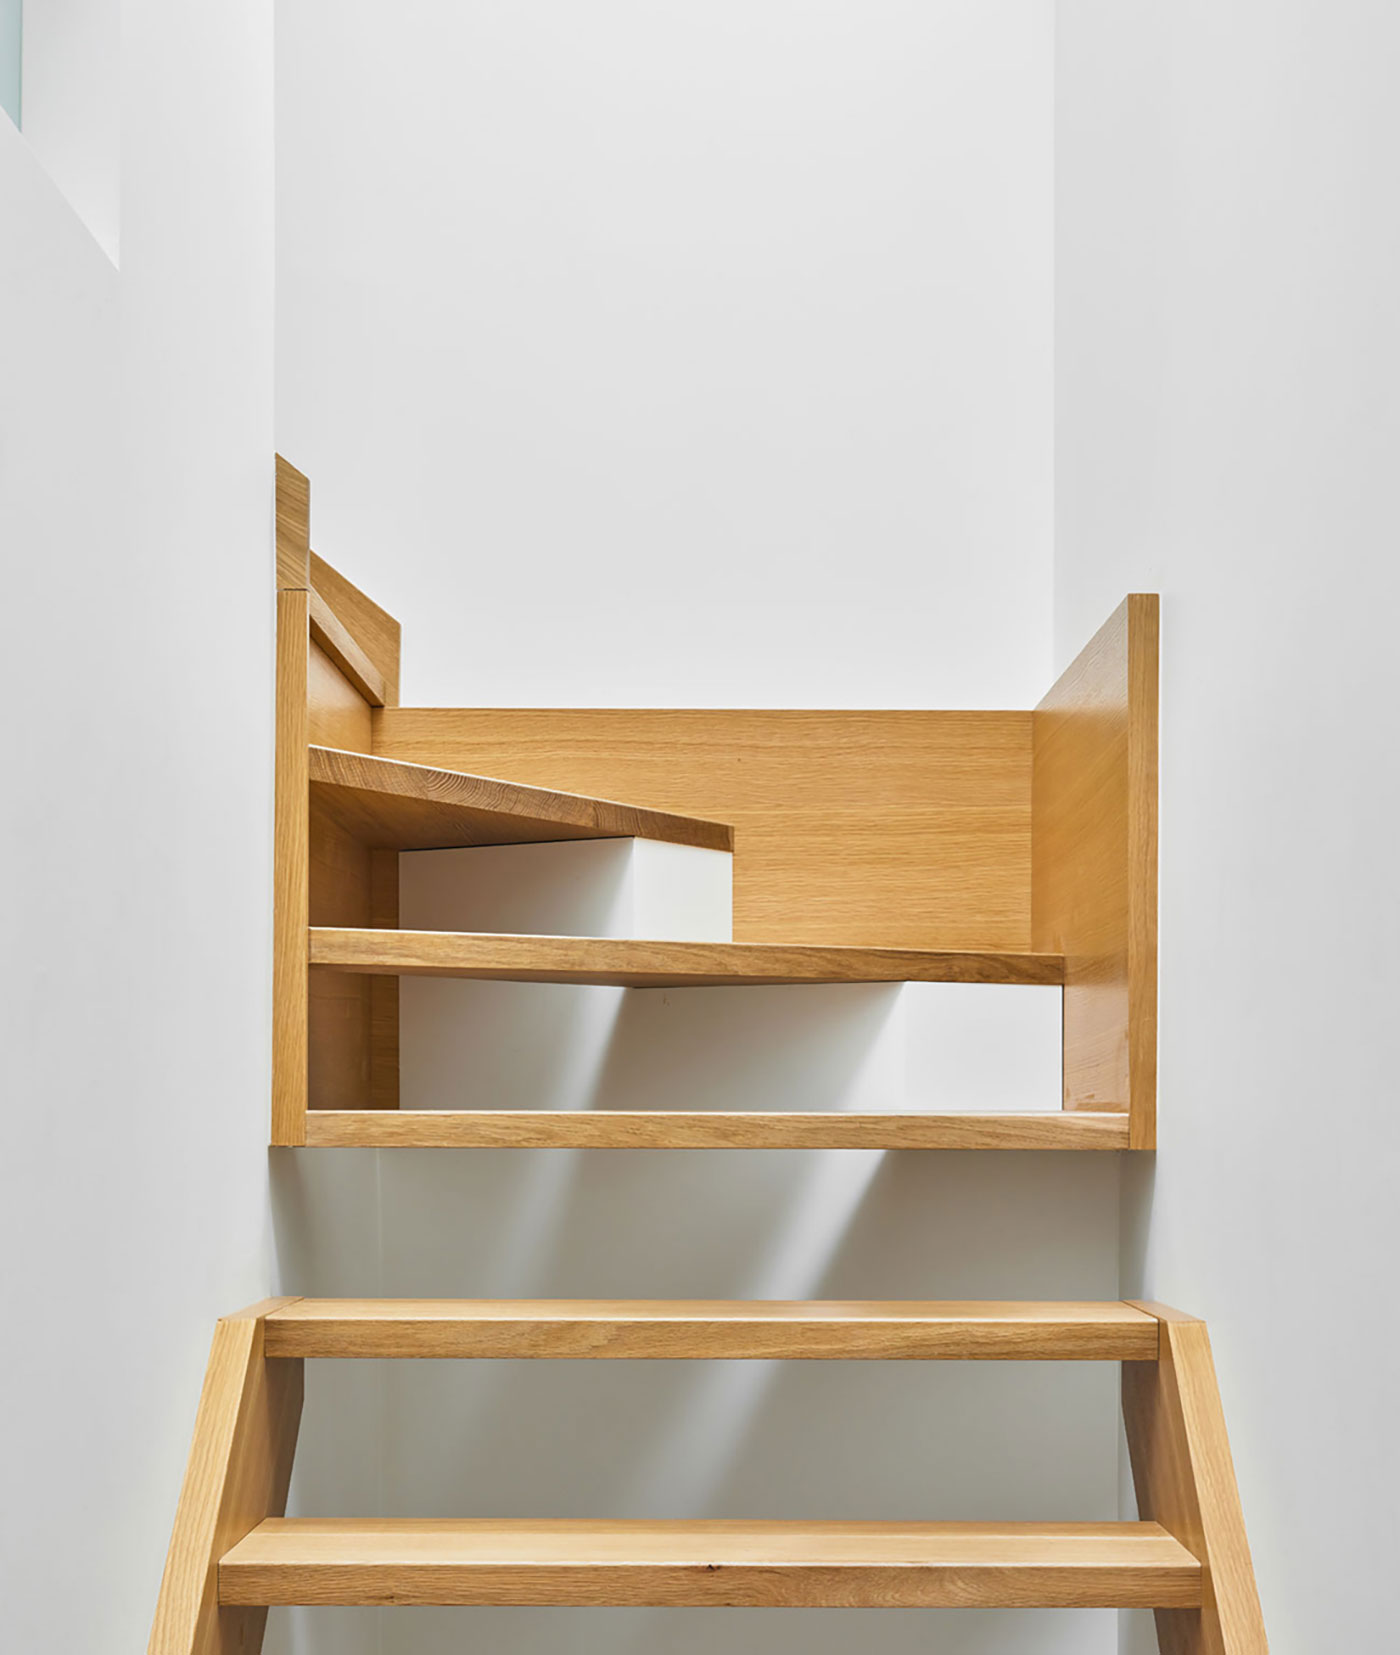 The staircase (built by LaFabrika) spans three storeys and features open white oak treads on concealed brackets.